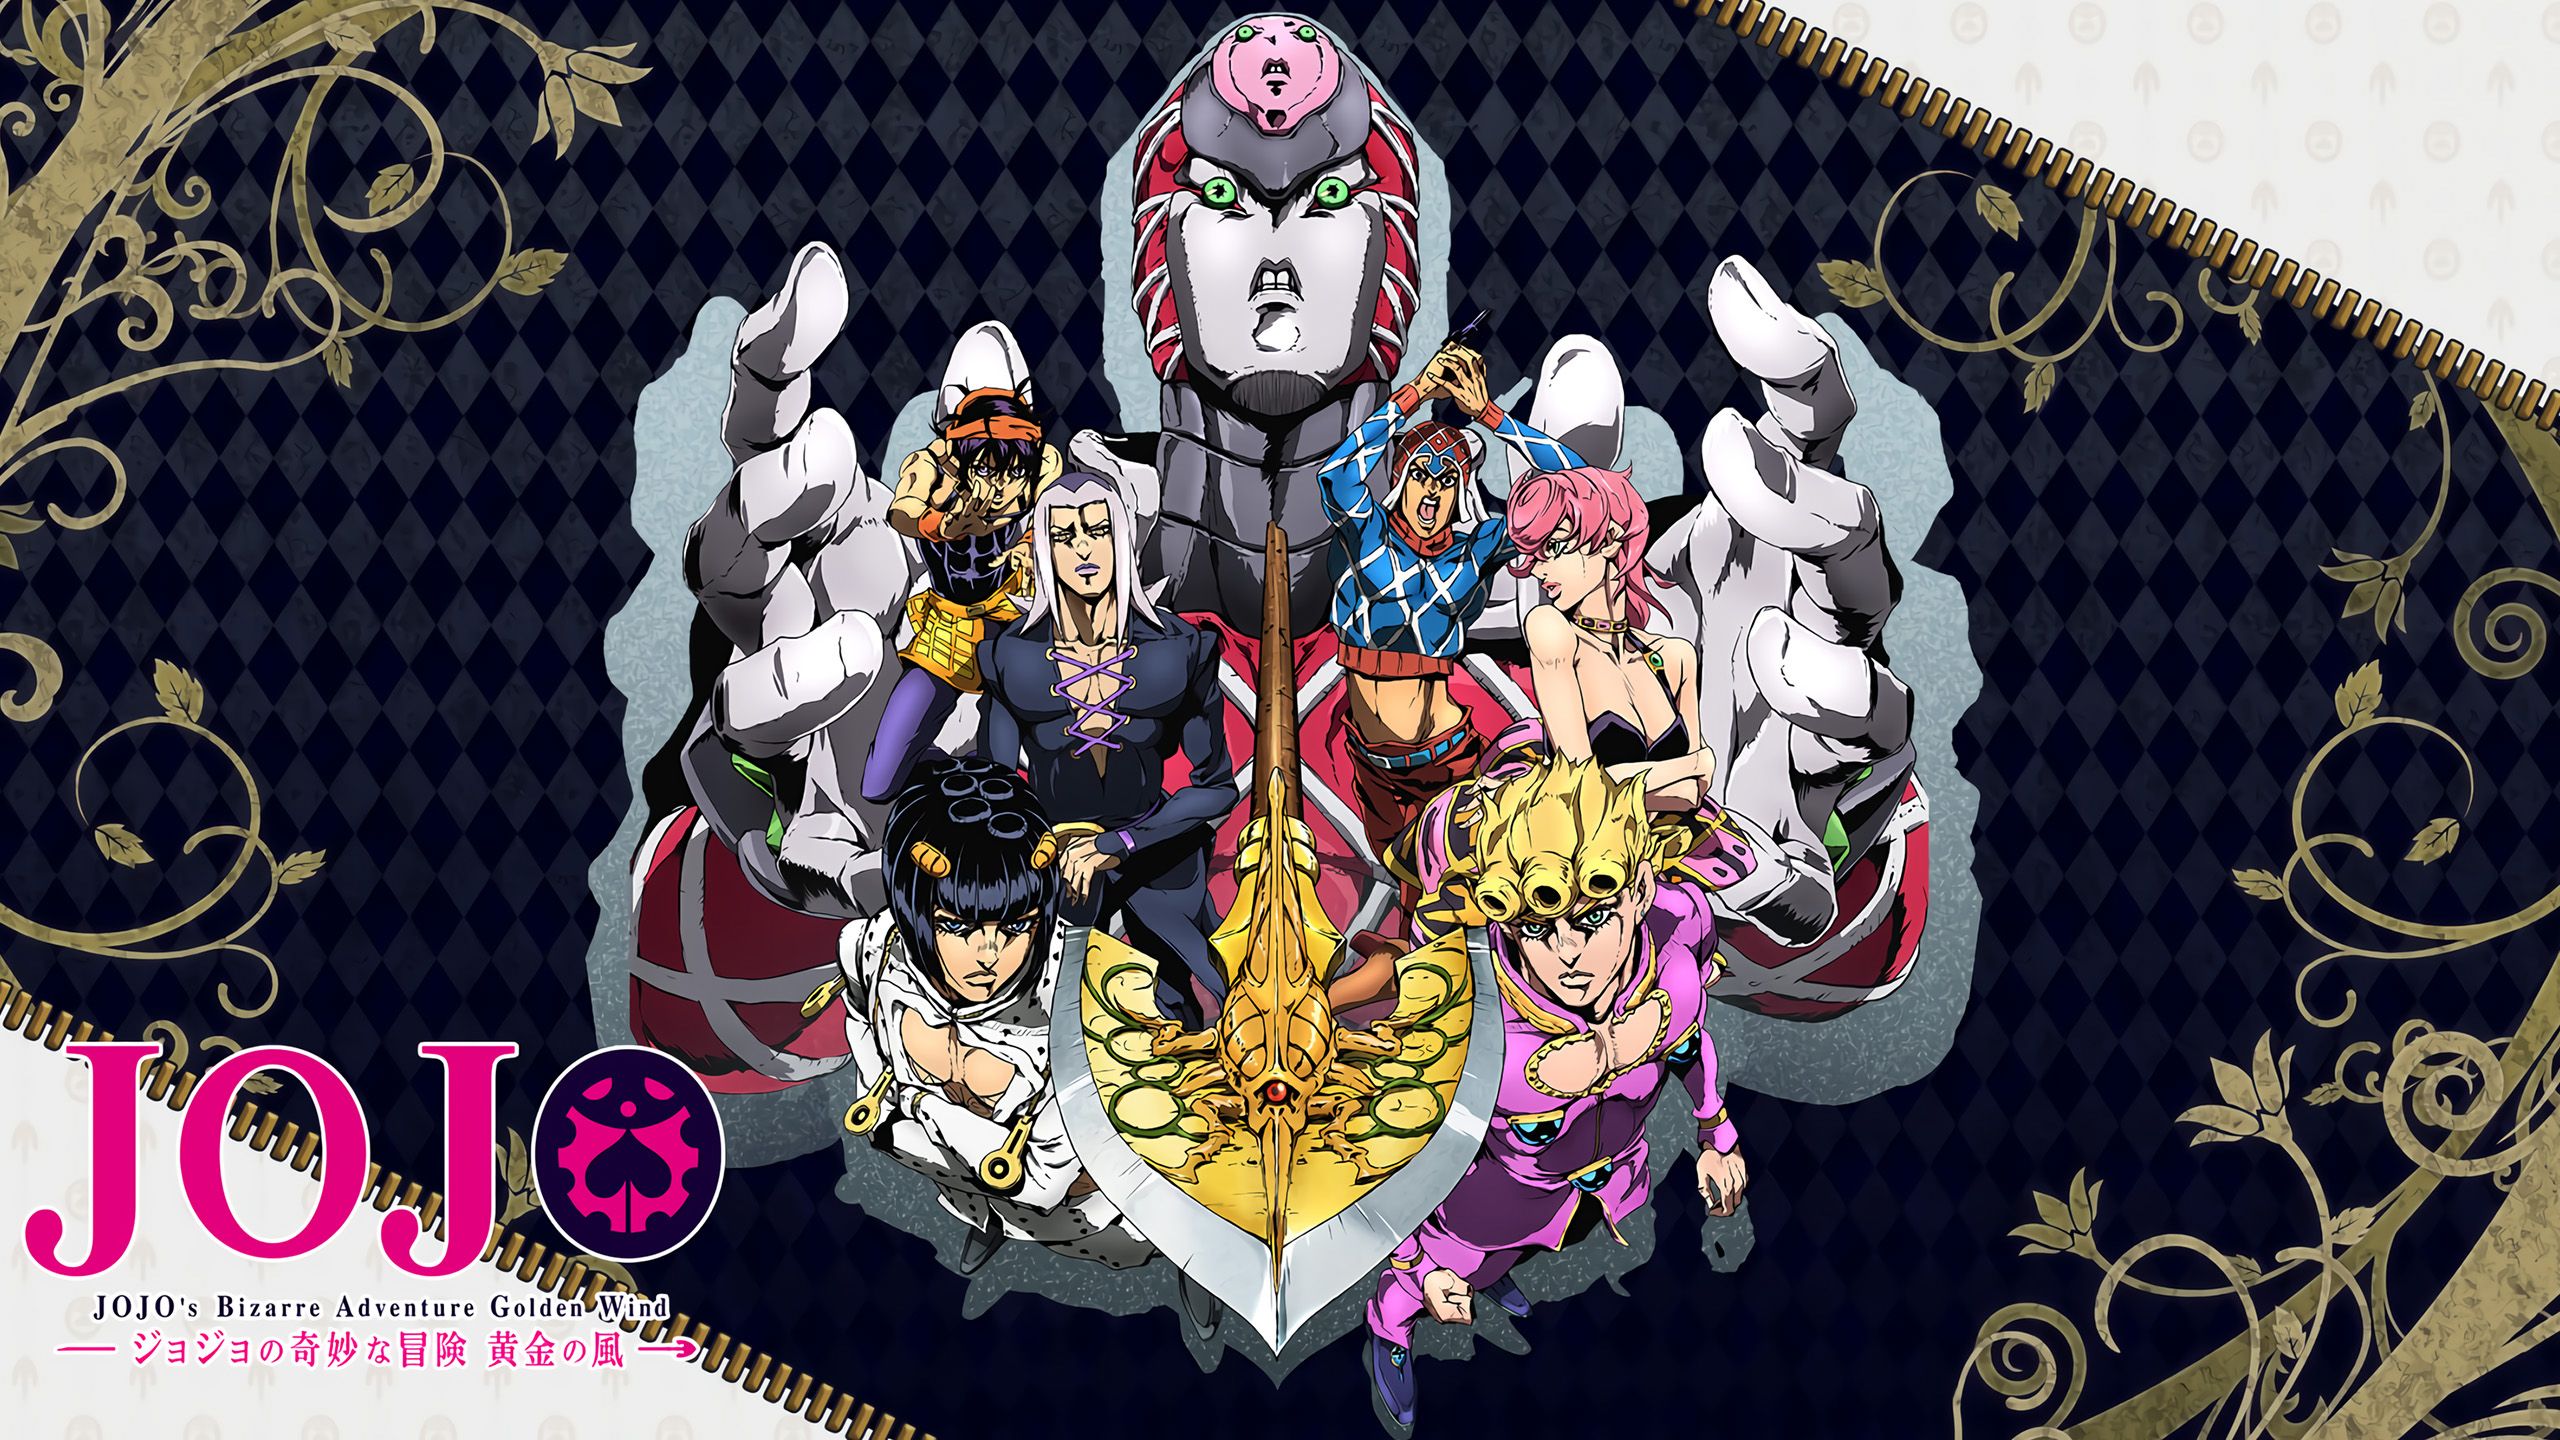 Jojo Bizarre Adventure Golden Wind King Crimson With Background Of Blue And Black And Texture Designs On Sides HD Anime Wallpaper